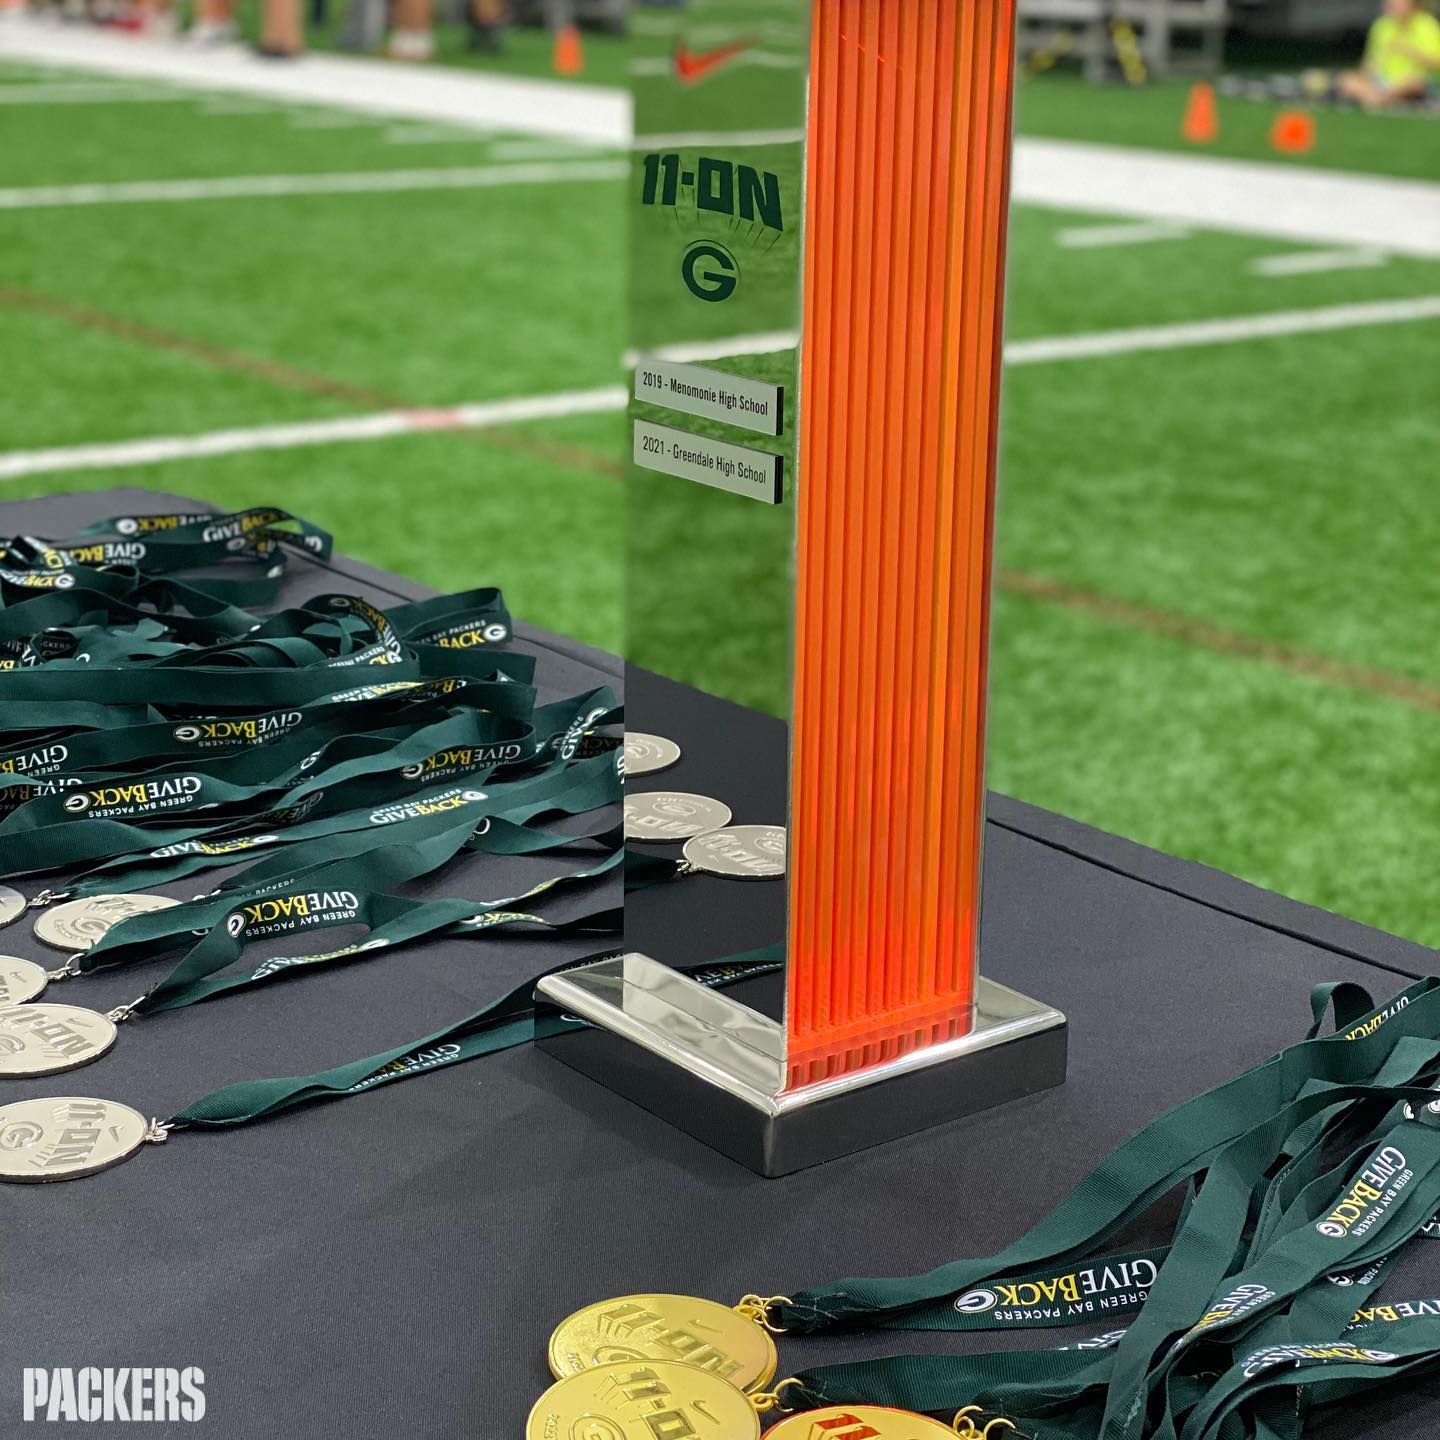 The #Packers 11-ON event sponsored by Nike featured nine high school teams from ...